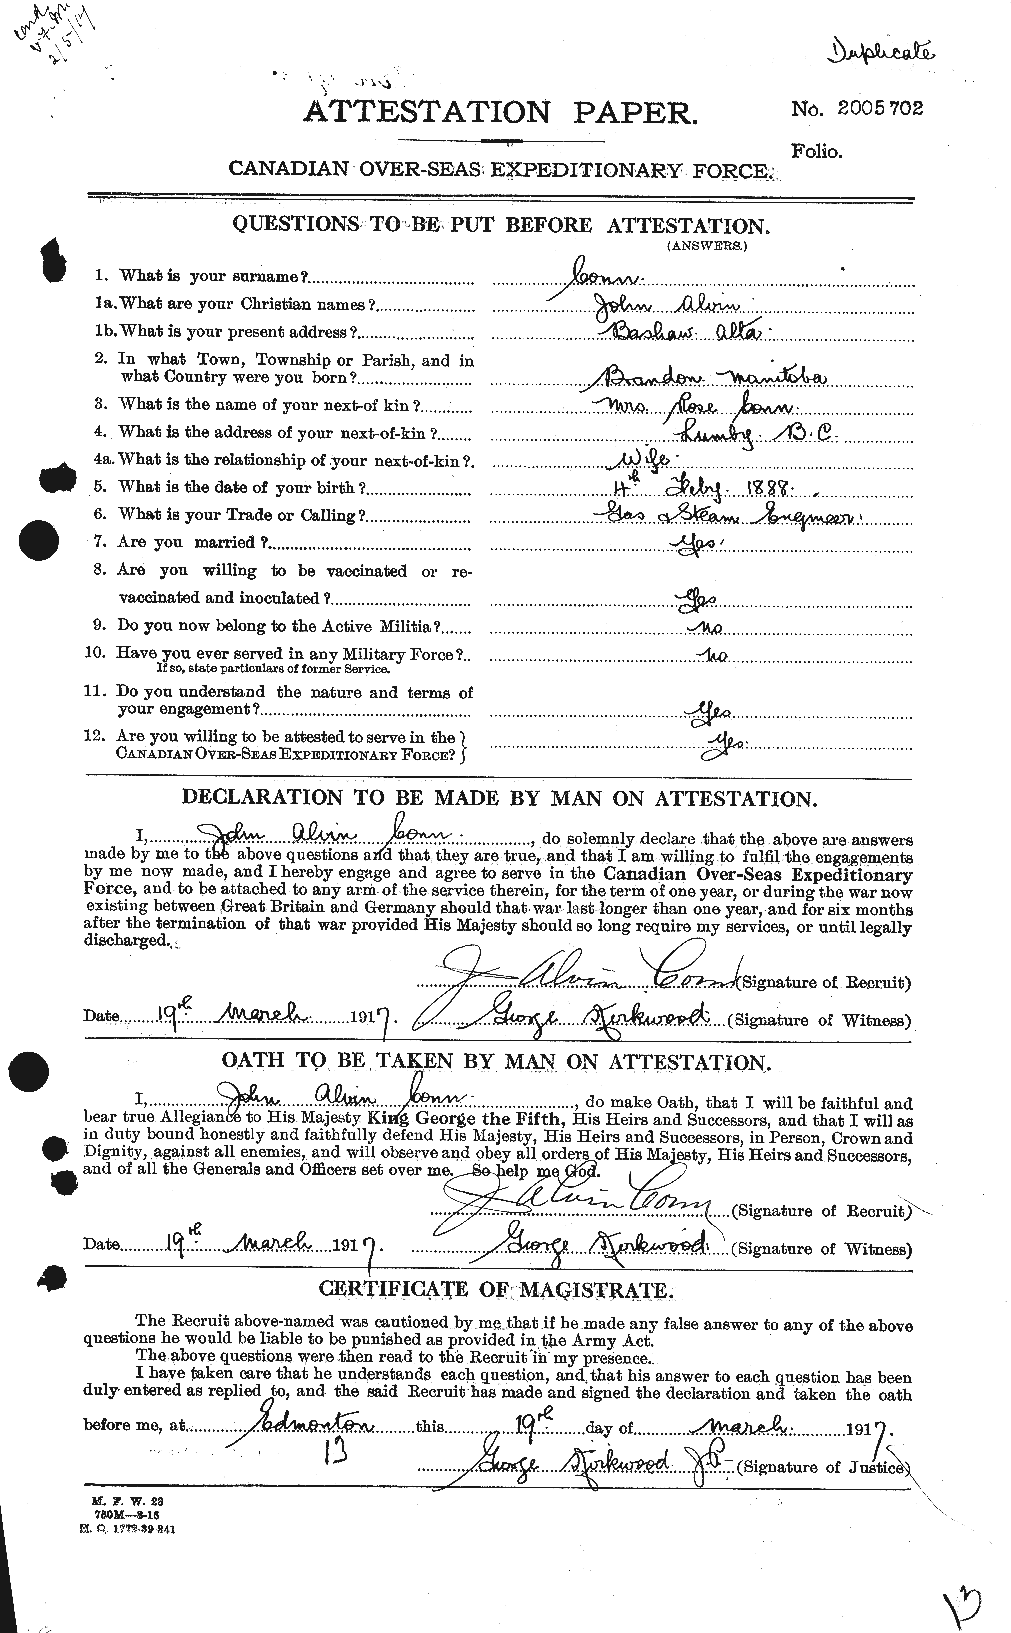 Personnel Records of the First World War - CEF 067598a